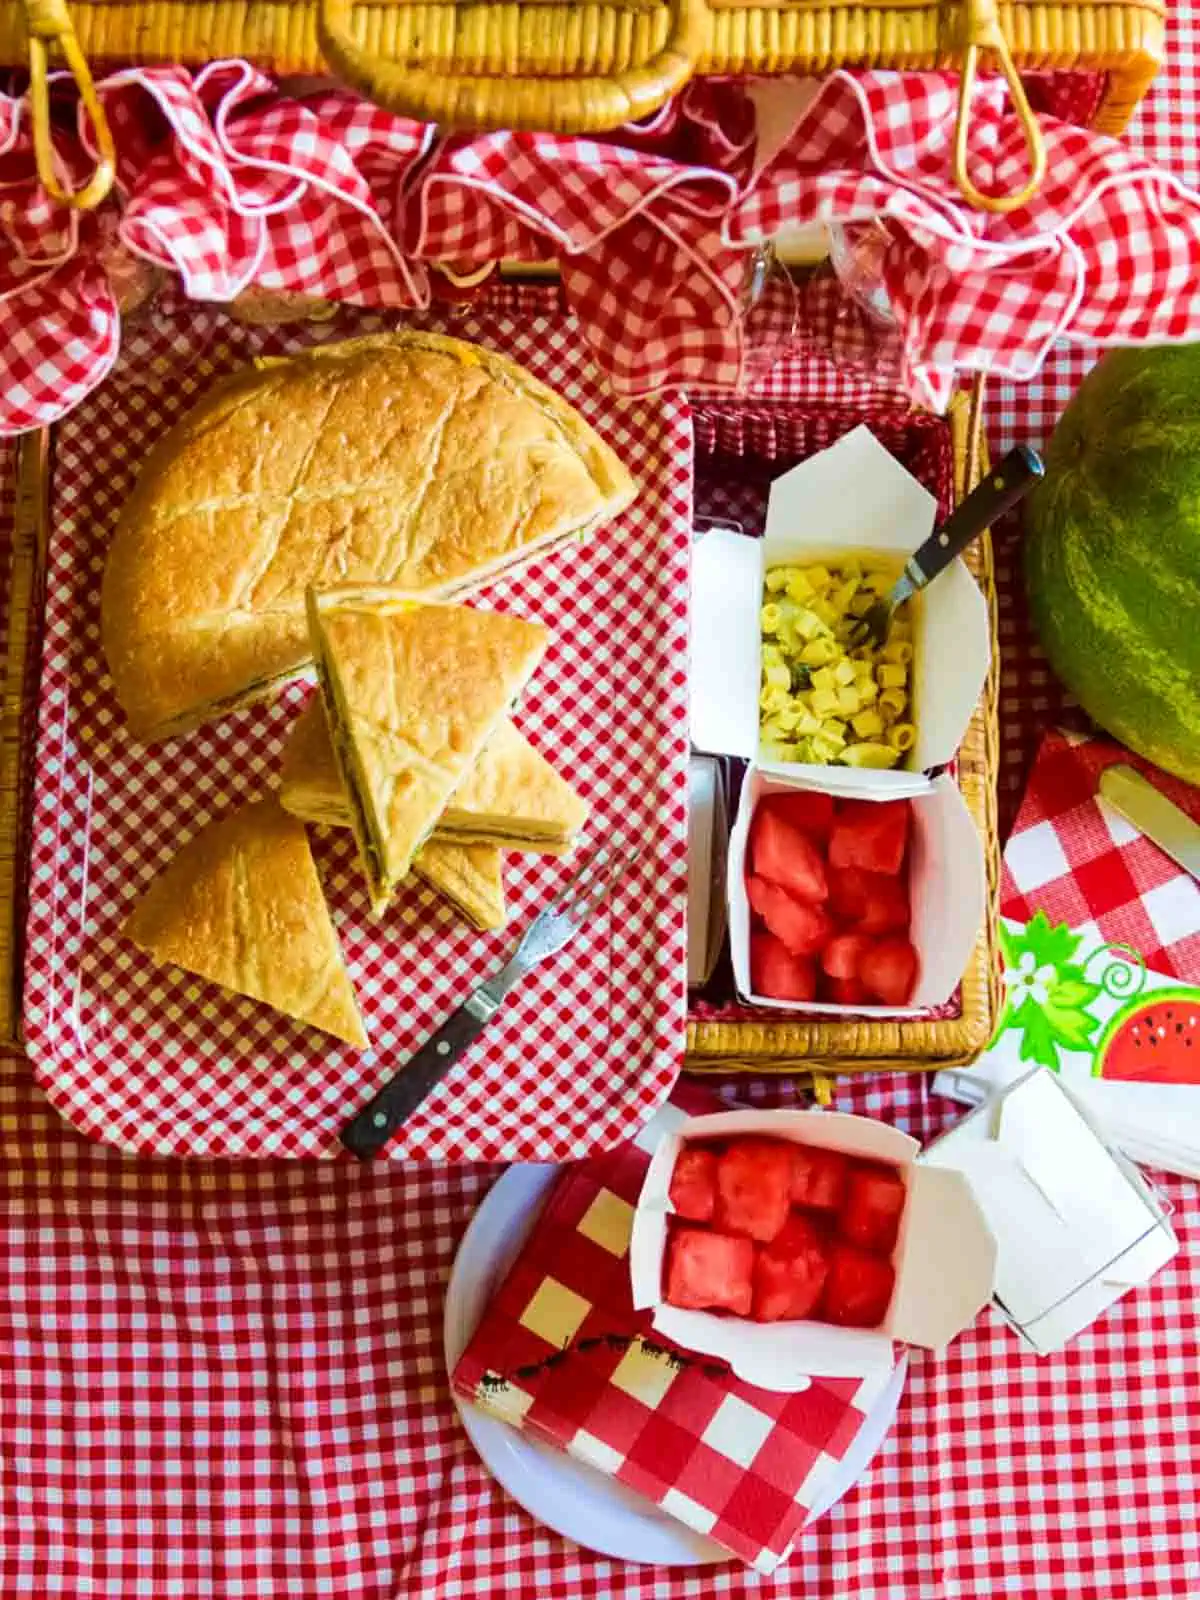 A red and white picnic basket with picnic sandwiches, watermelon and mac salad.